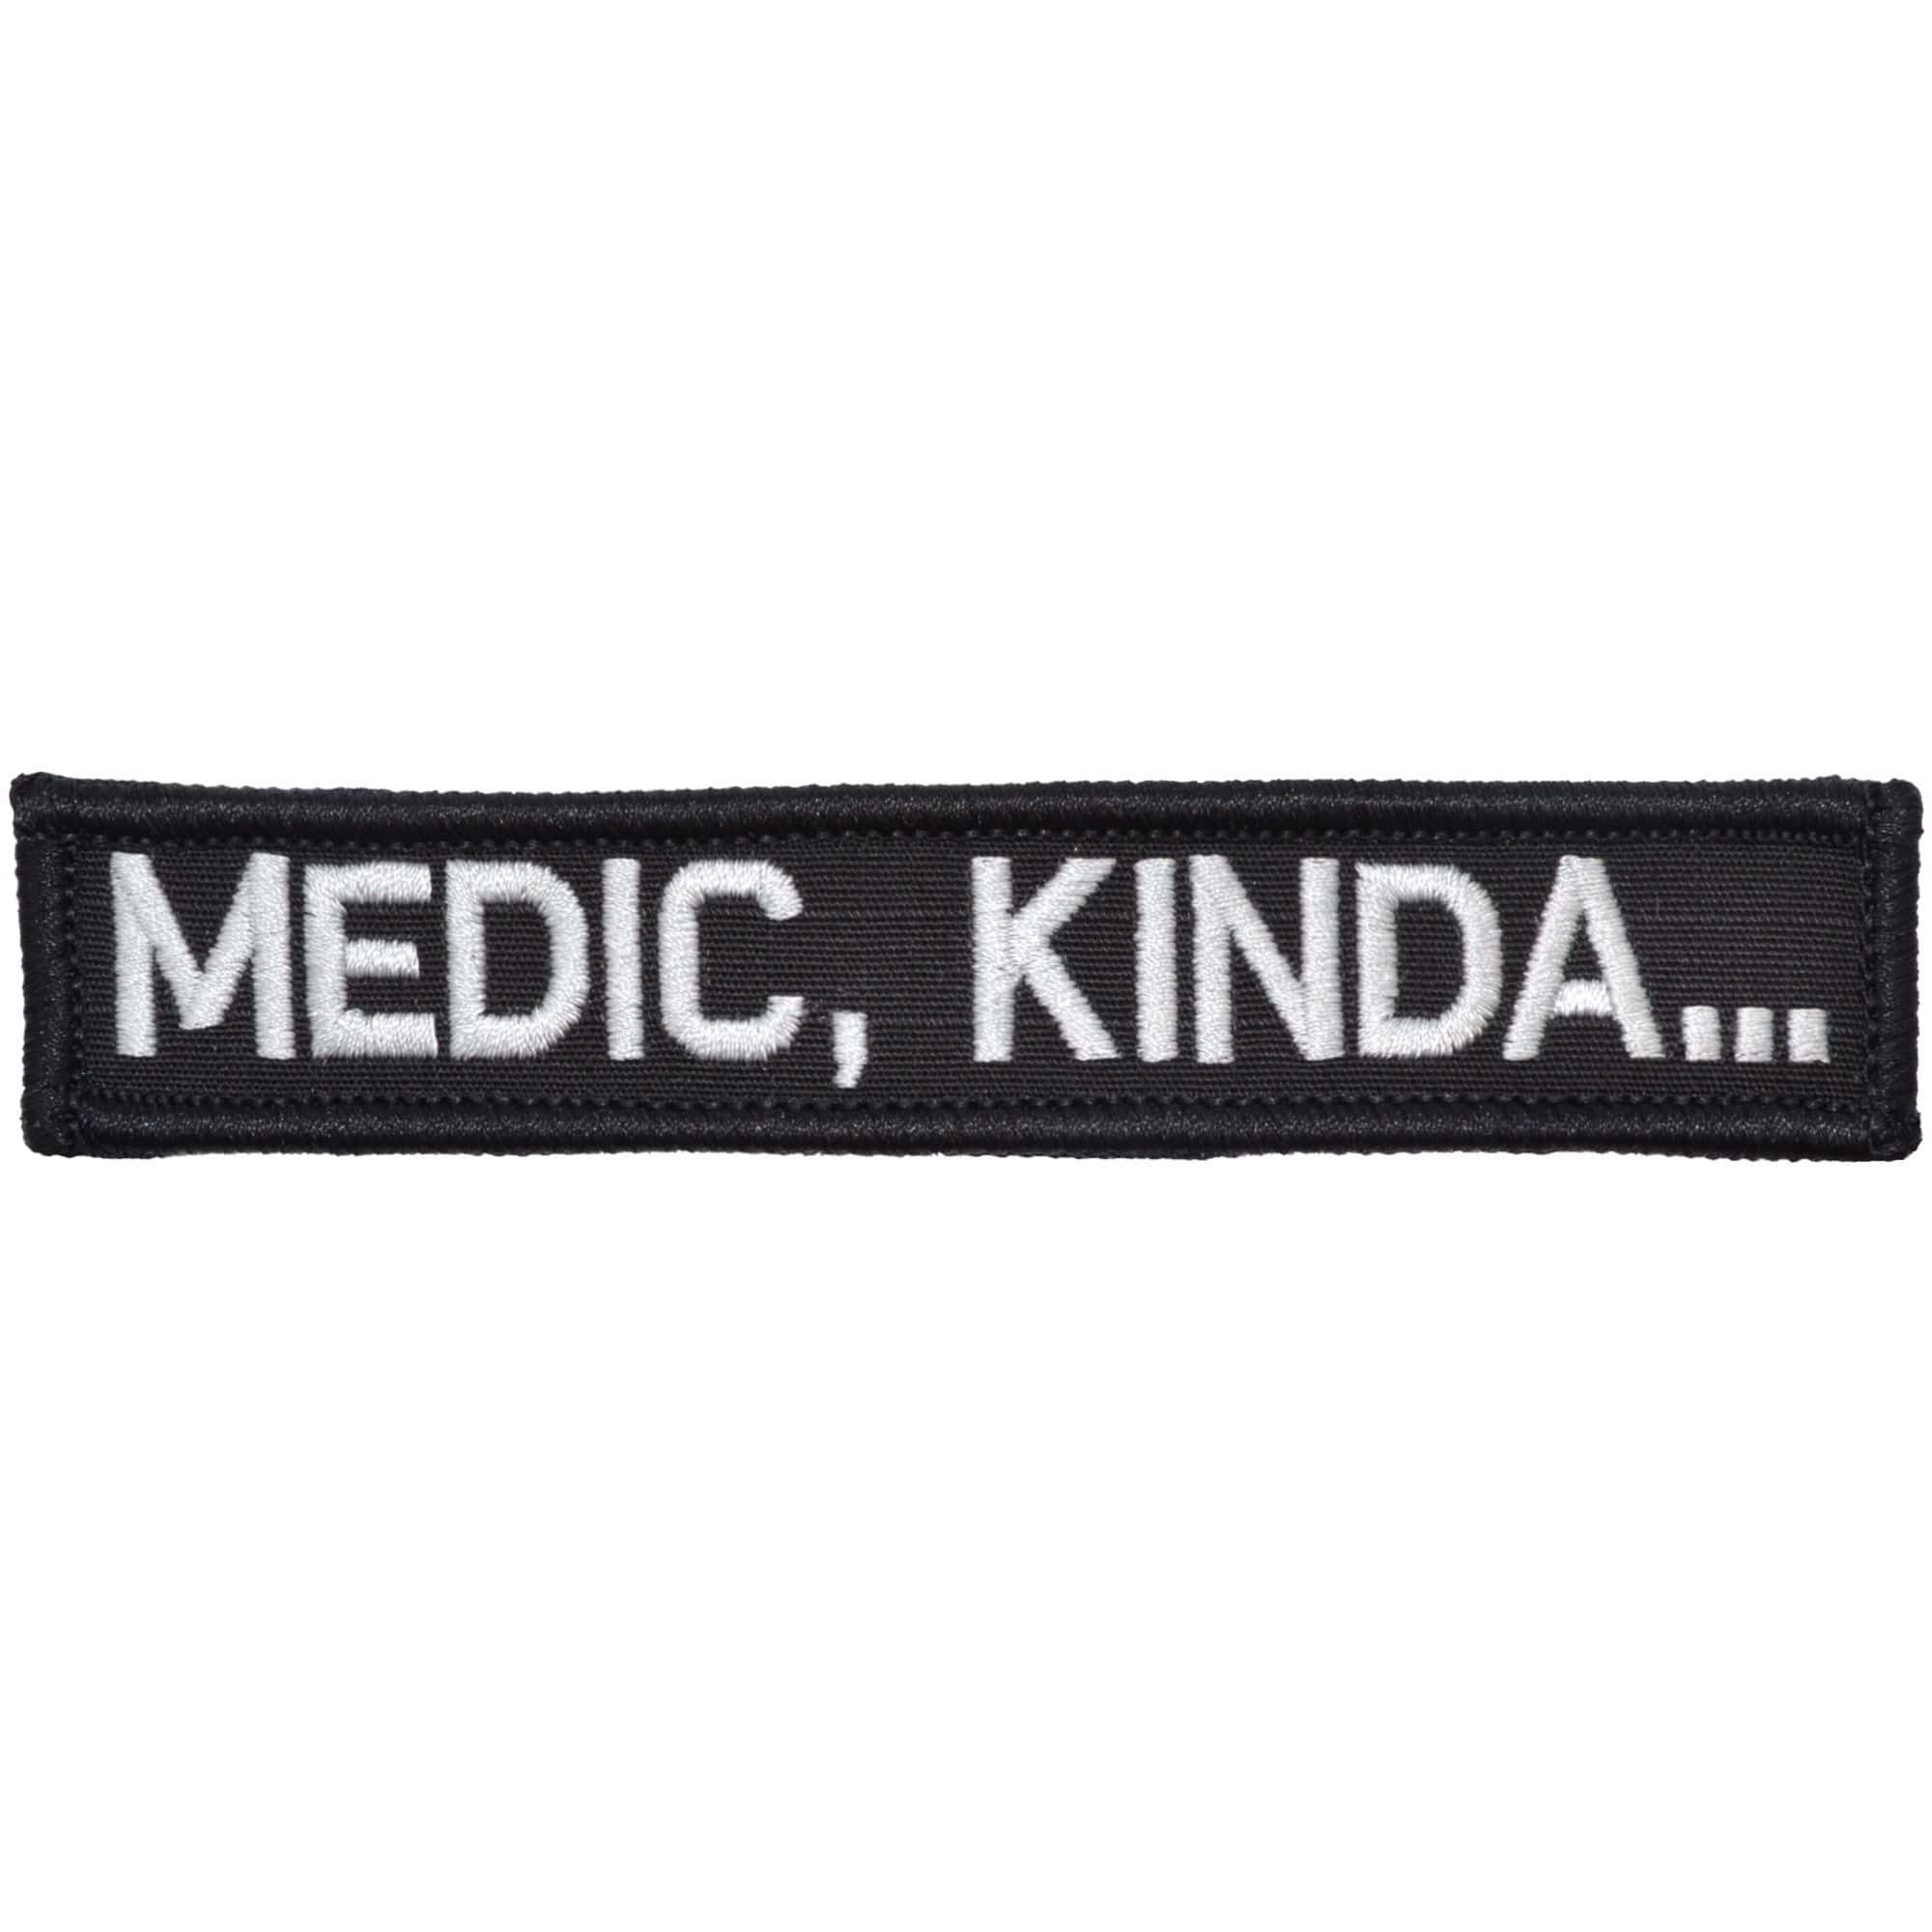 Tactical Gear Junkie Patches Black Medic, Kinda... - 1x5 Patch